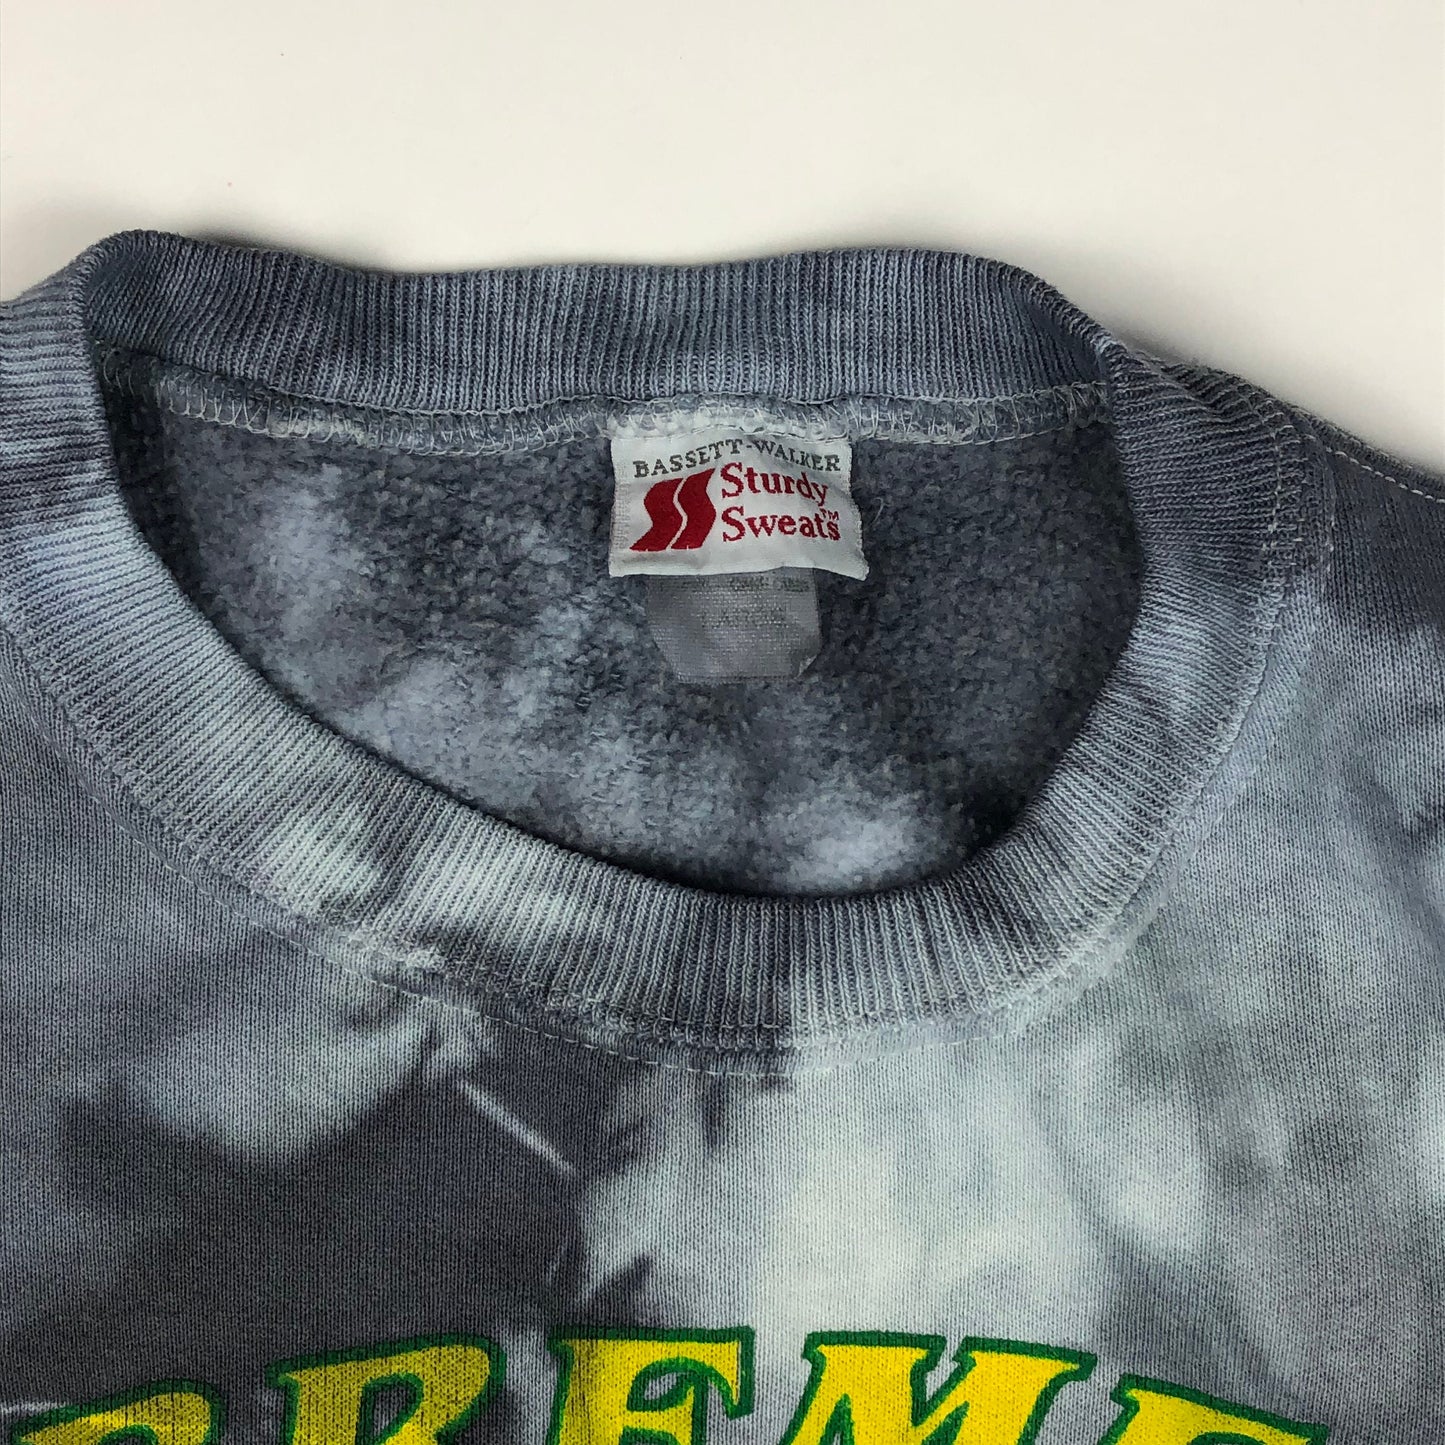 1990s Overdyed Bremen Lions Sweatshirt Made in USA Size M/L